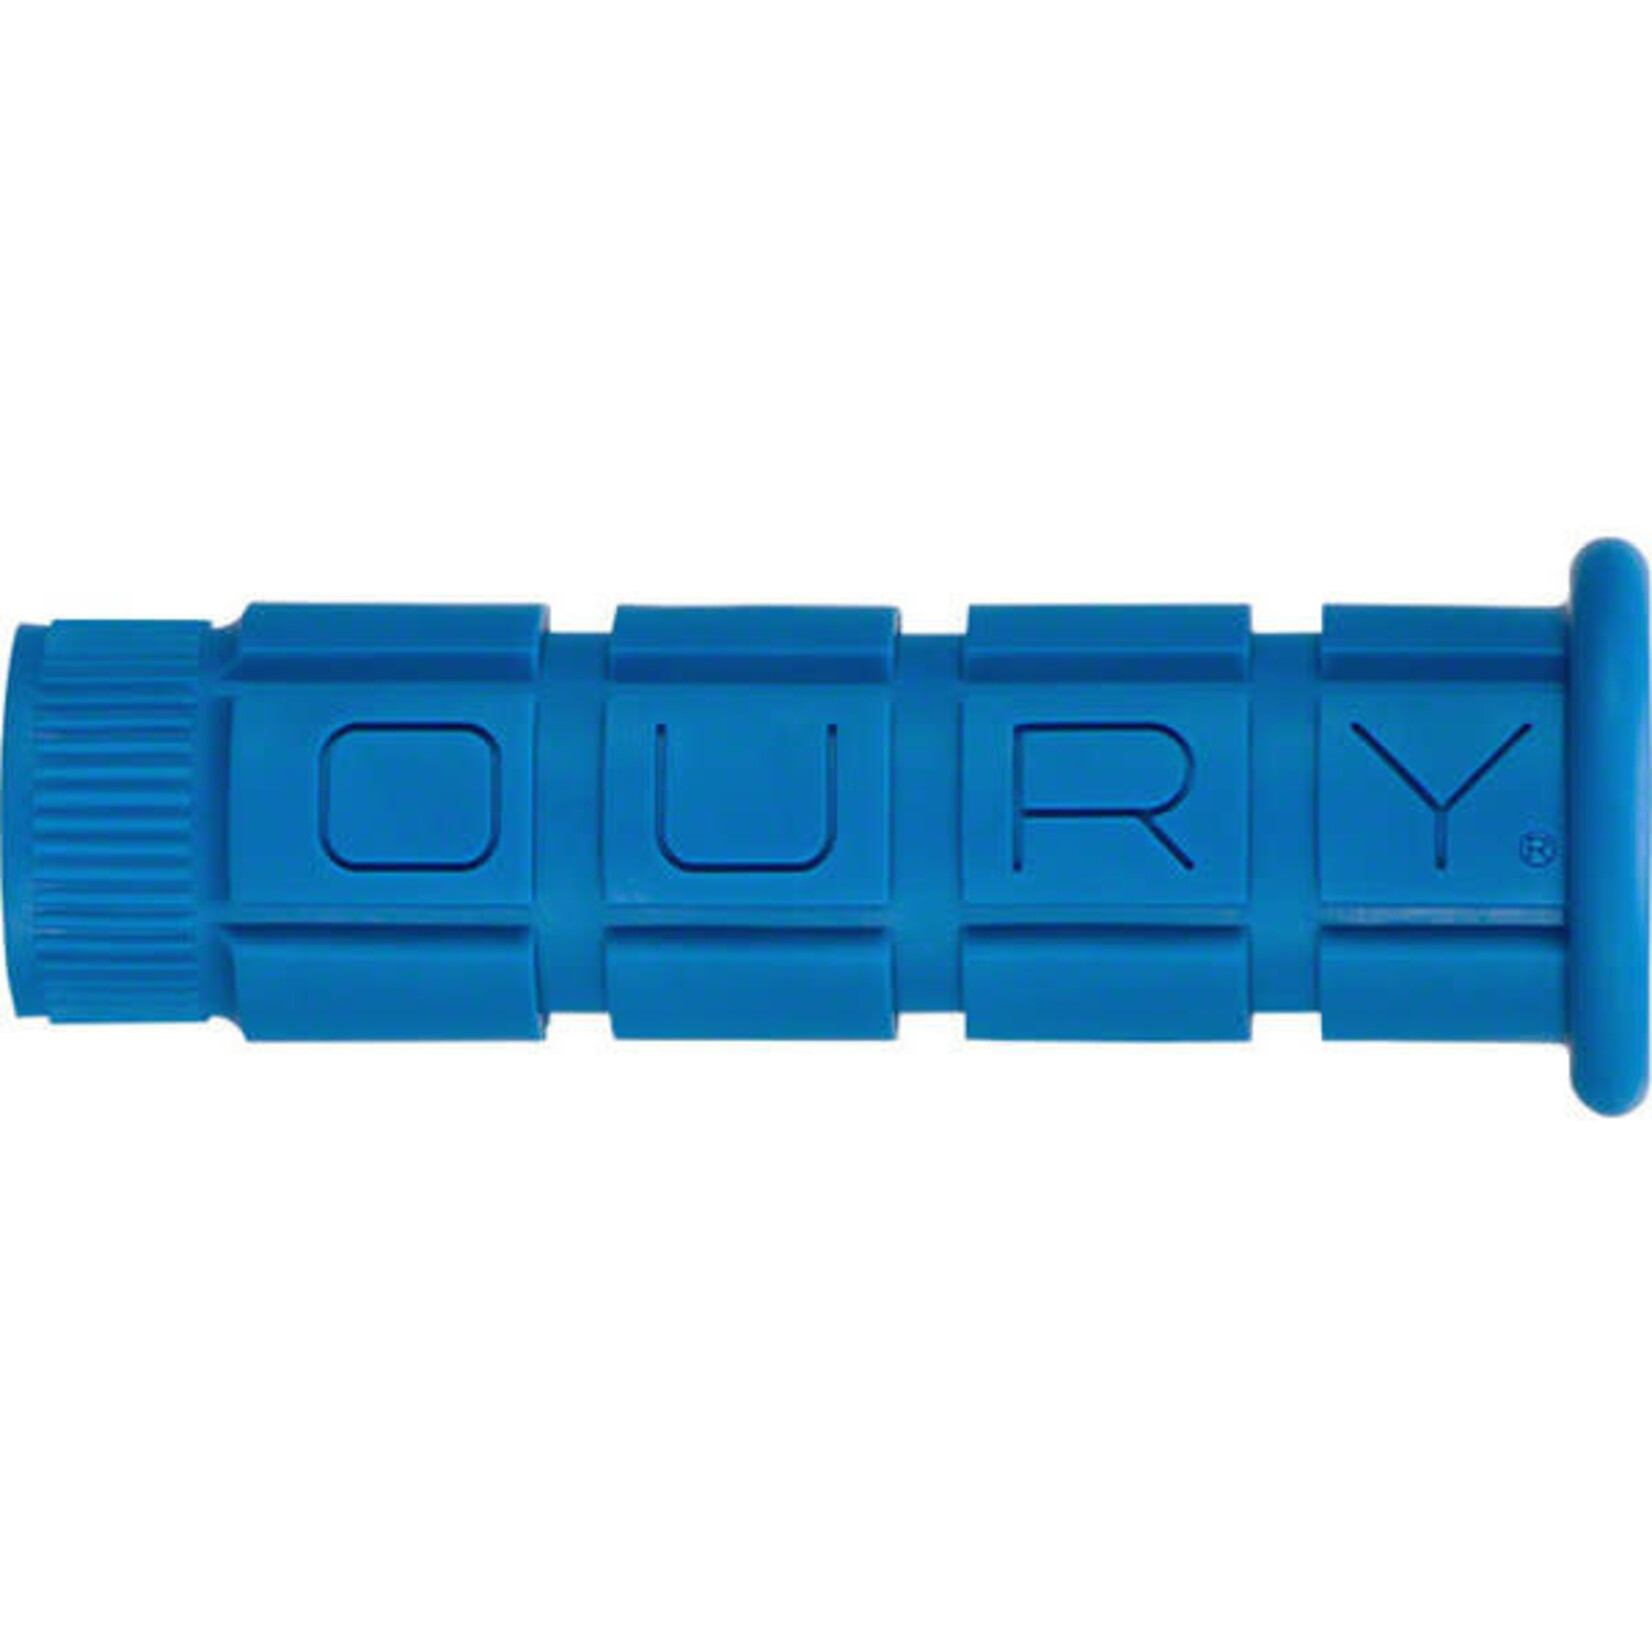 Ouri Oury Grips